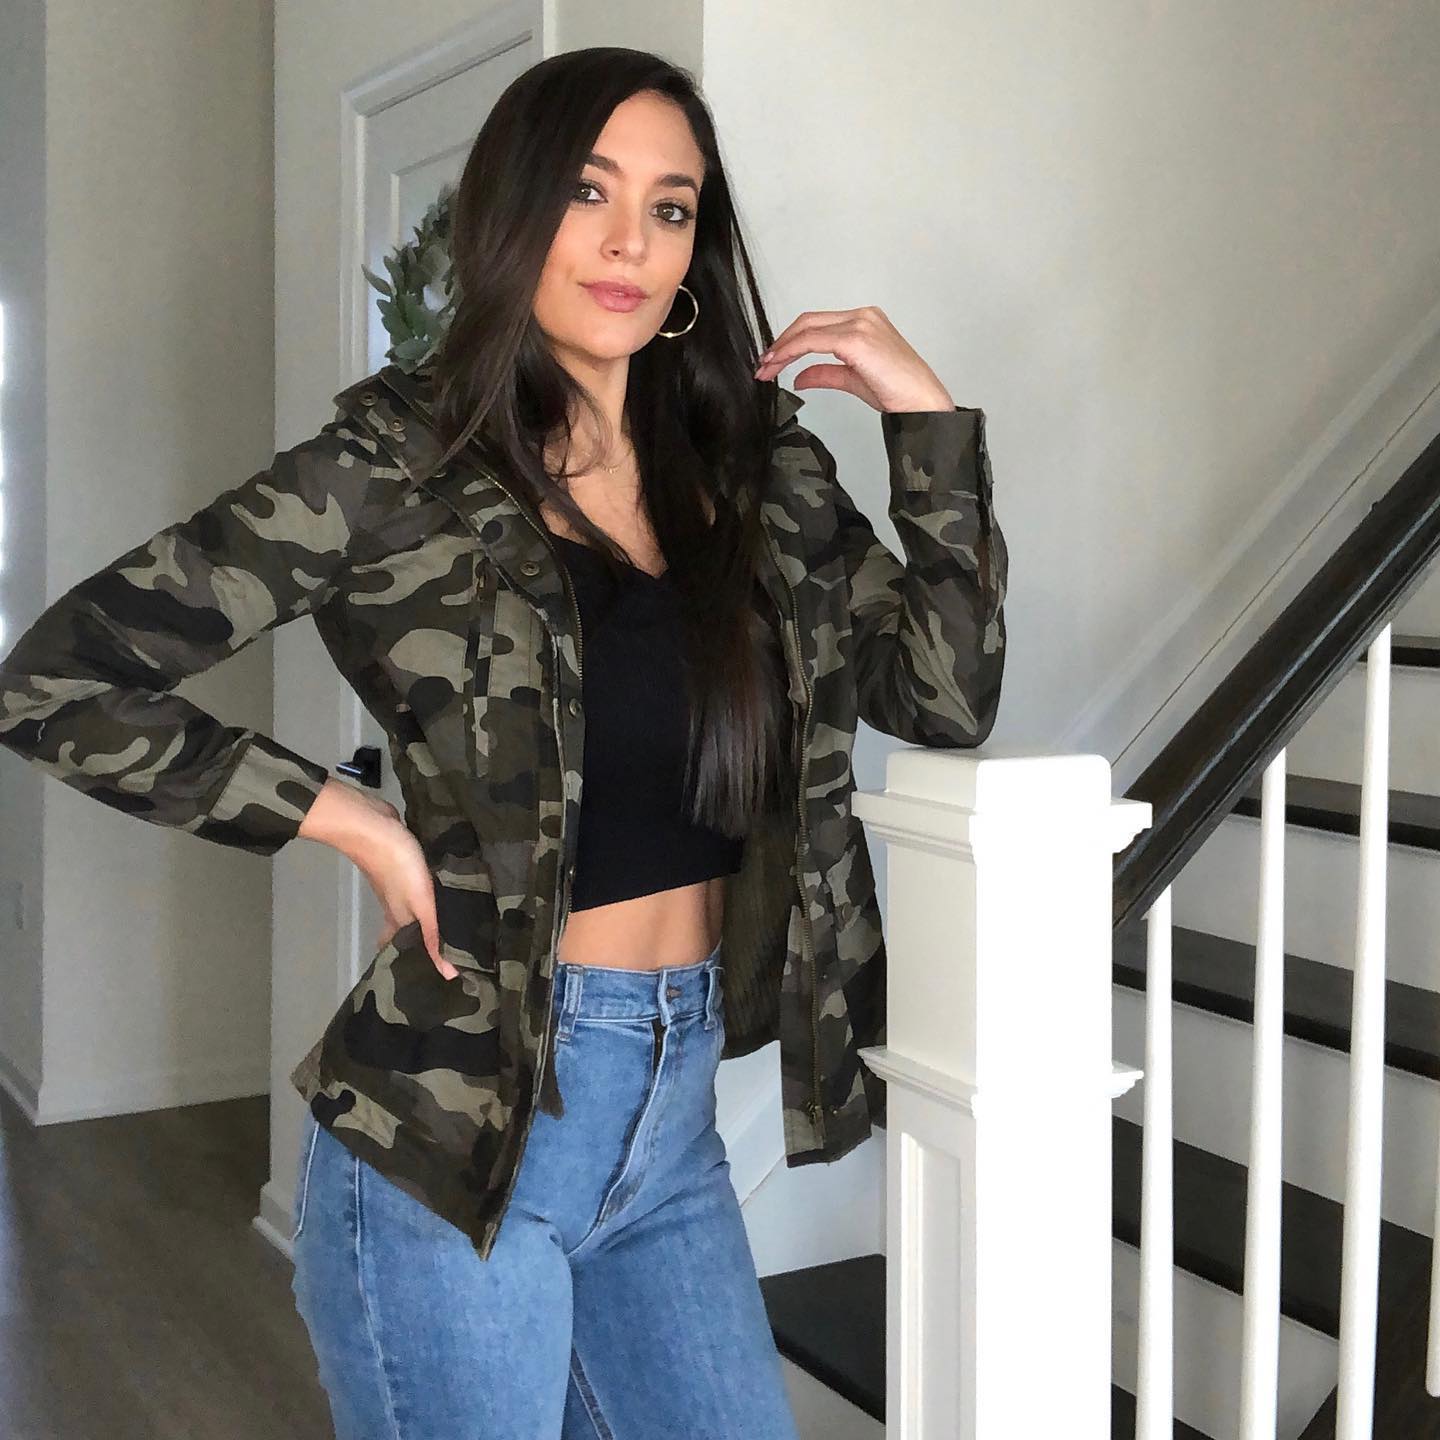 Jersey Shore alum Sammi 'Sweetheart' Giancola shows off her curves in tight  jeans & black crop top in new video